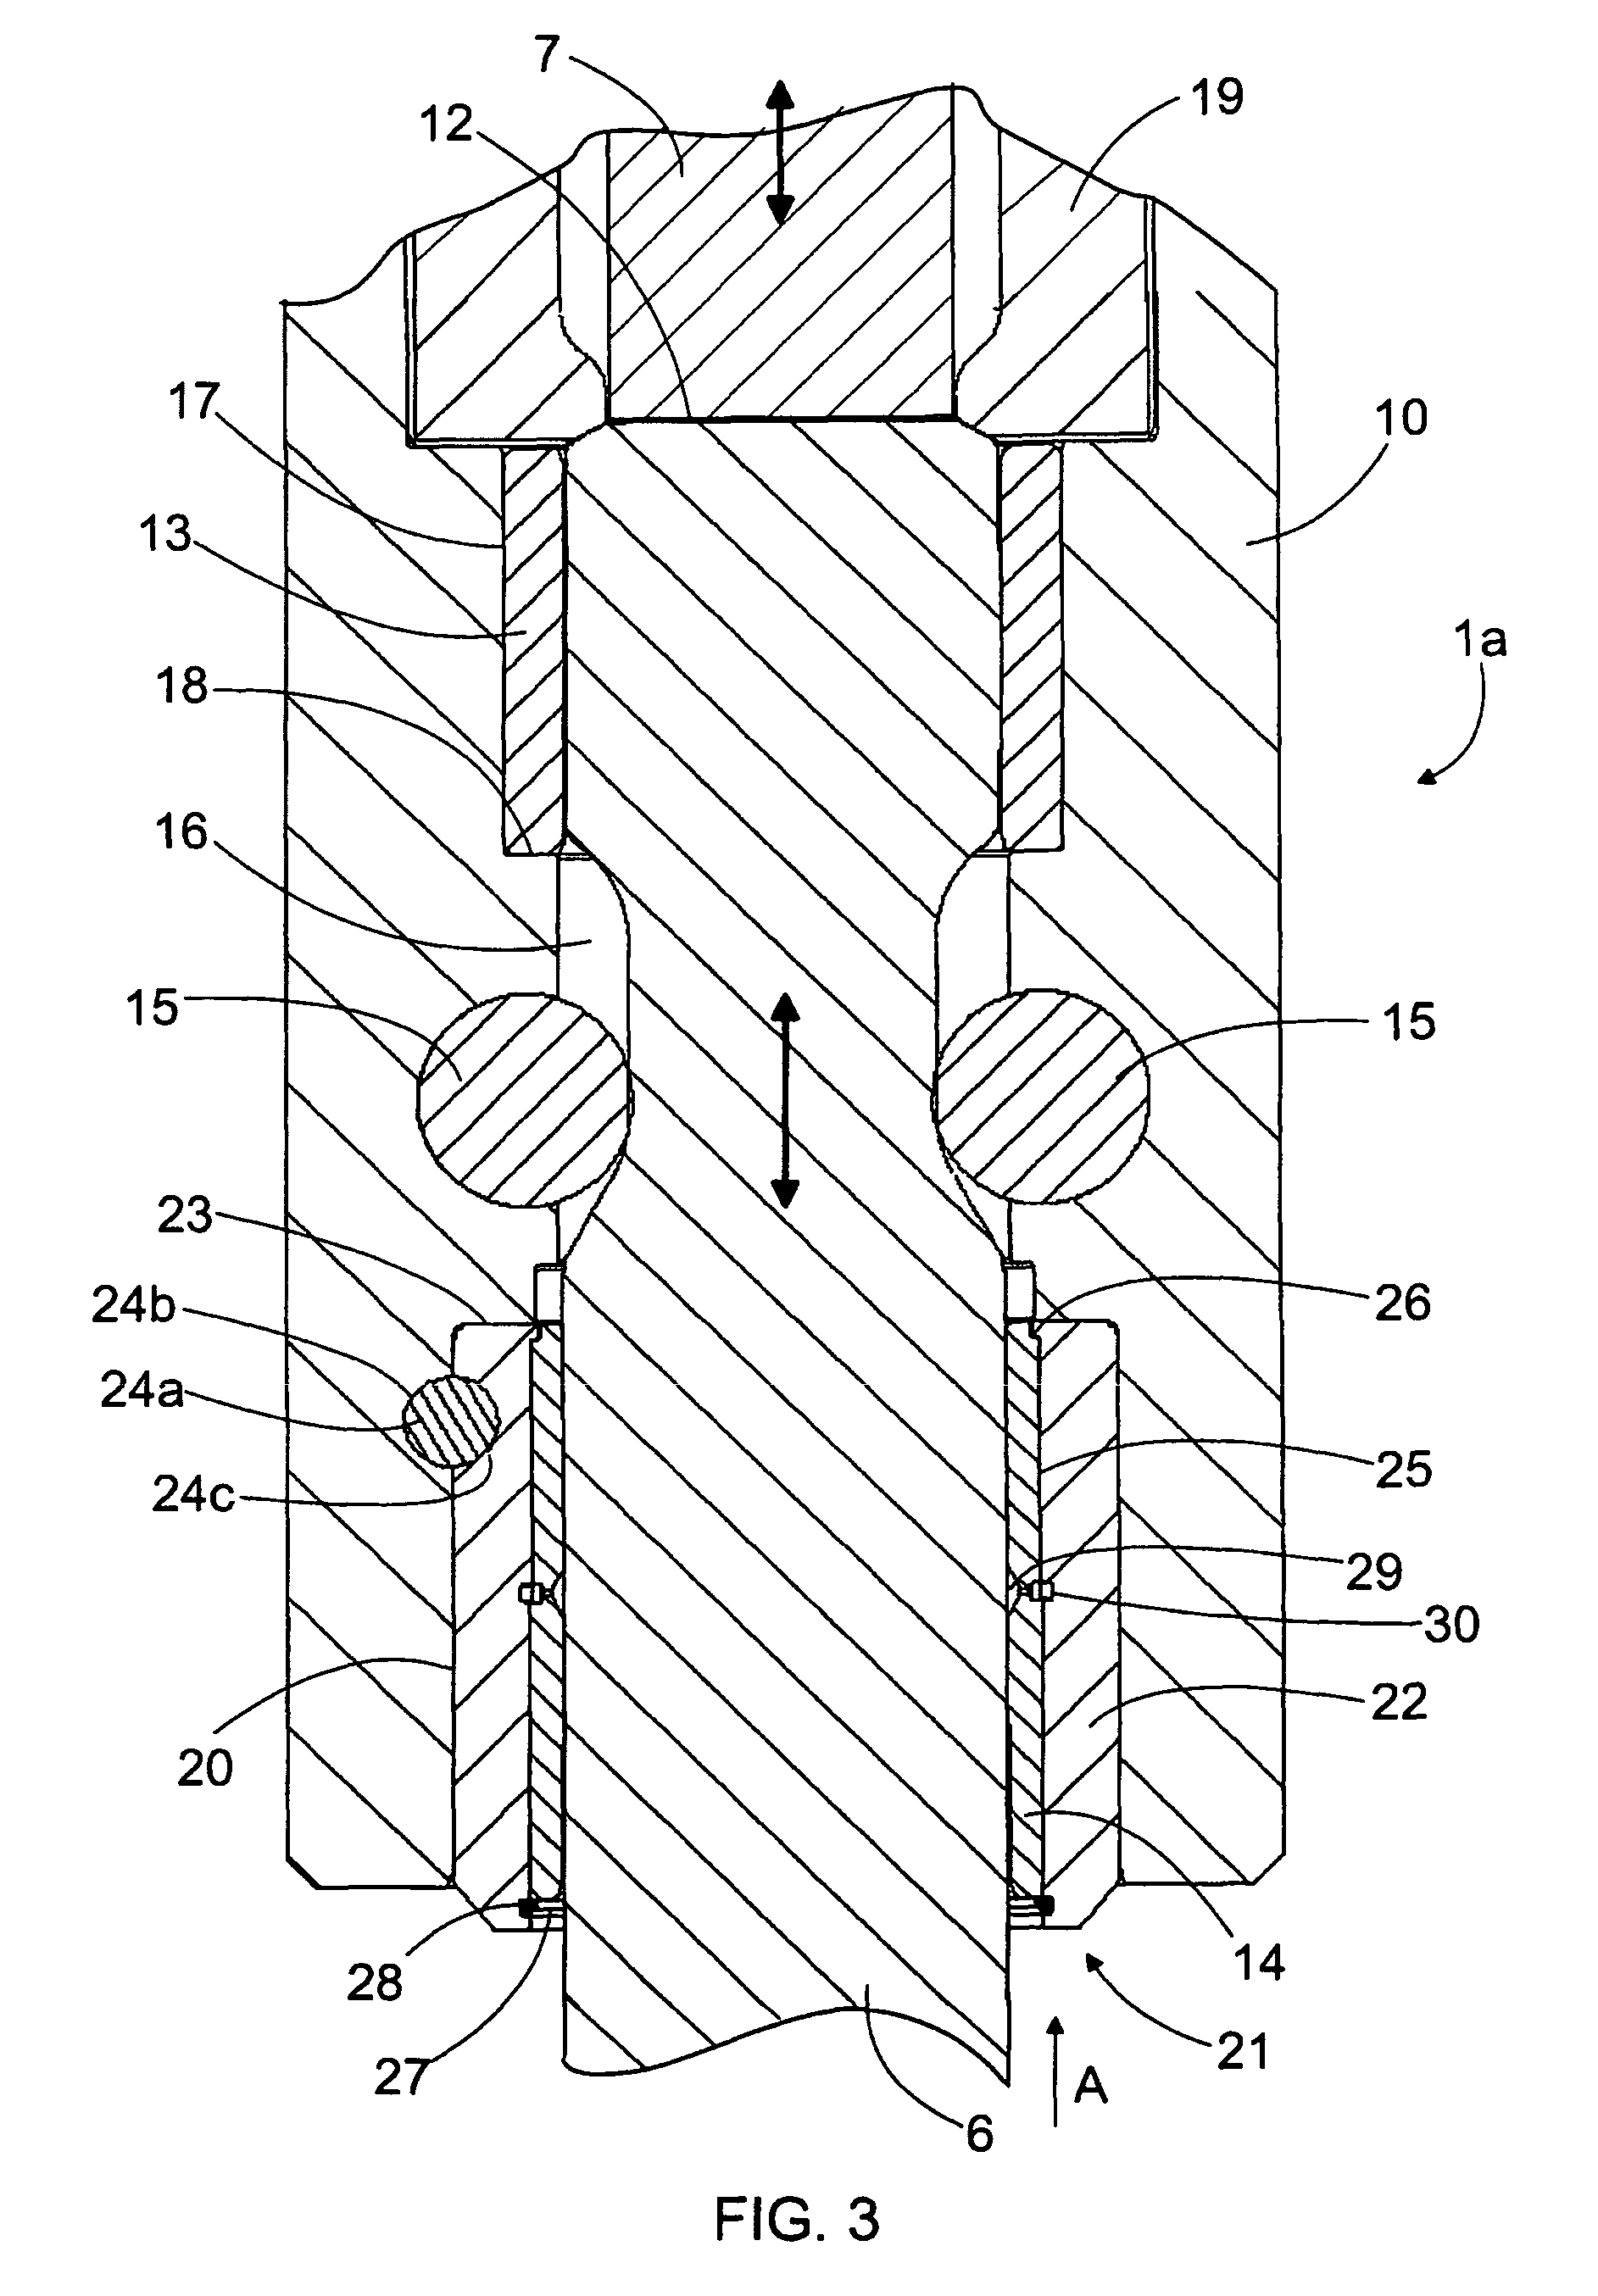 Bearing of a breaking device tool